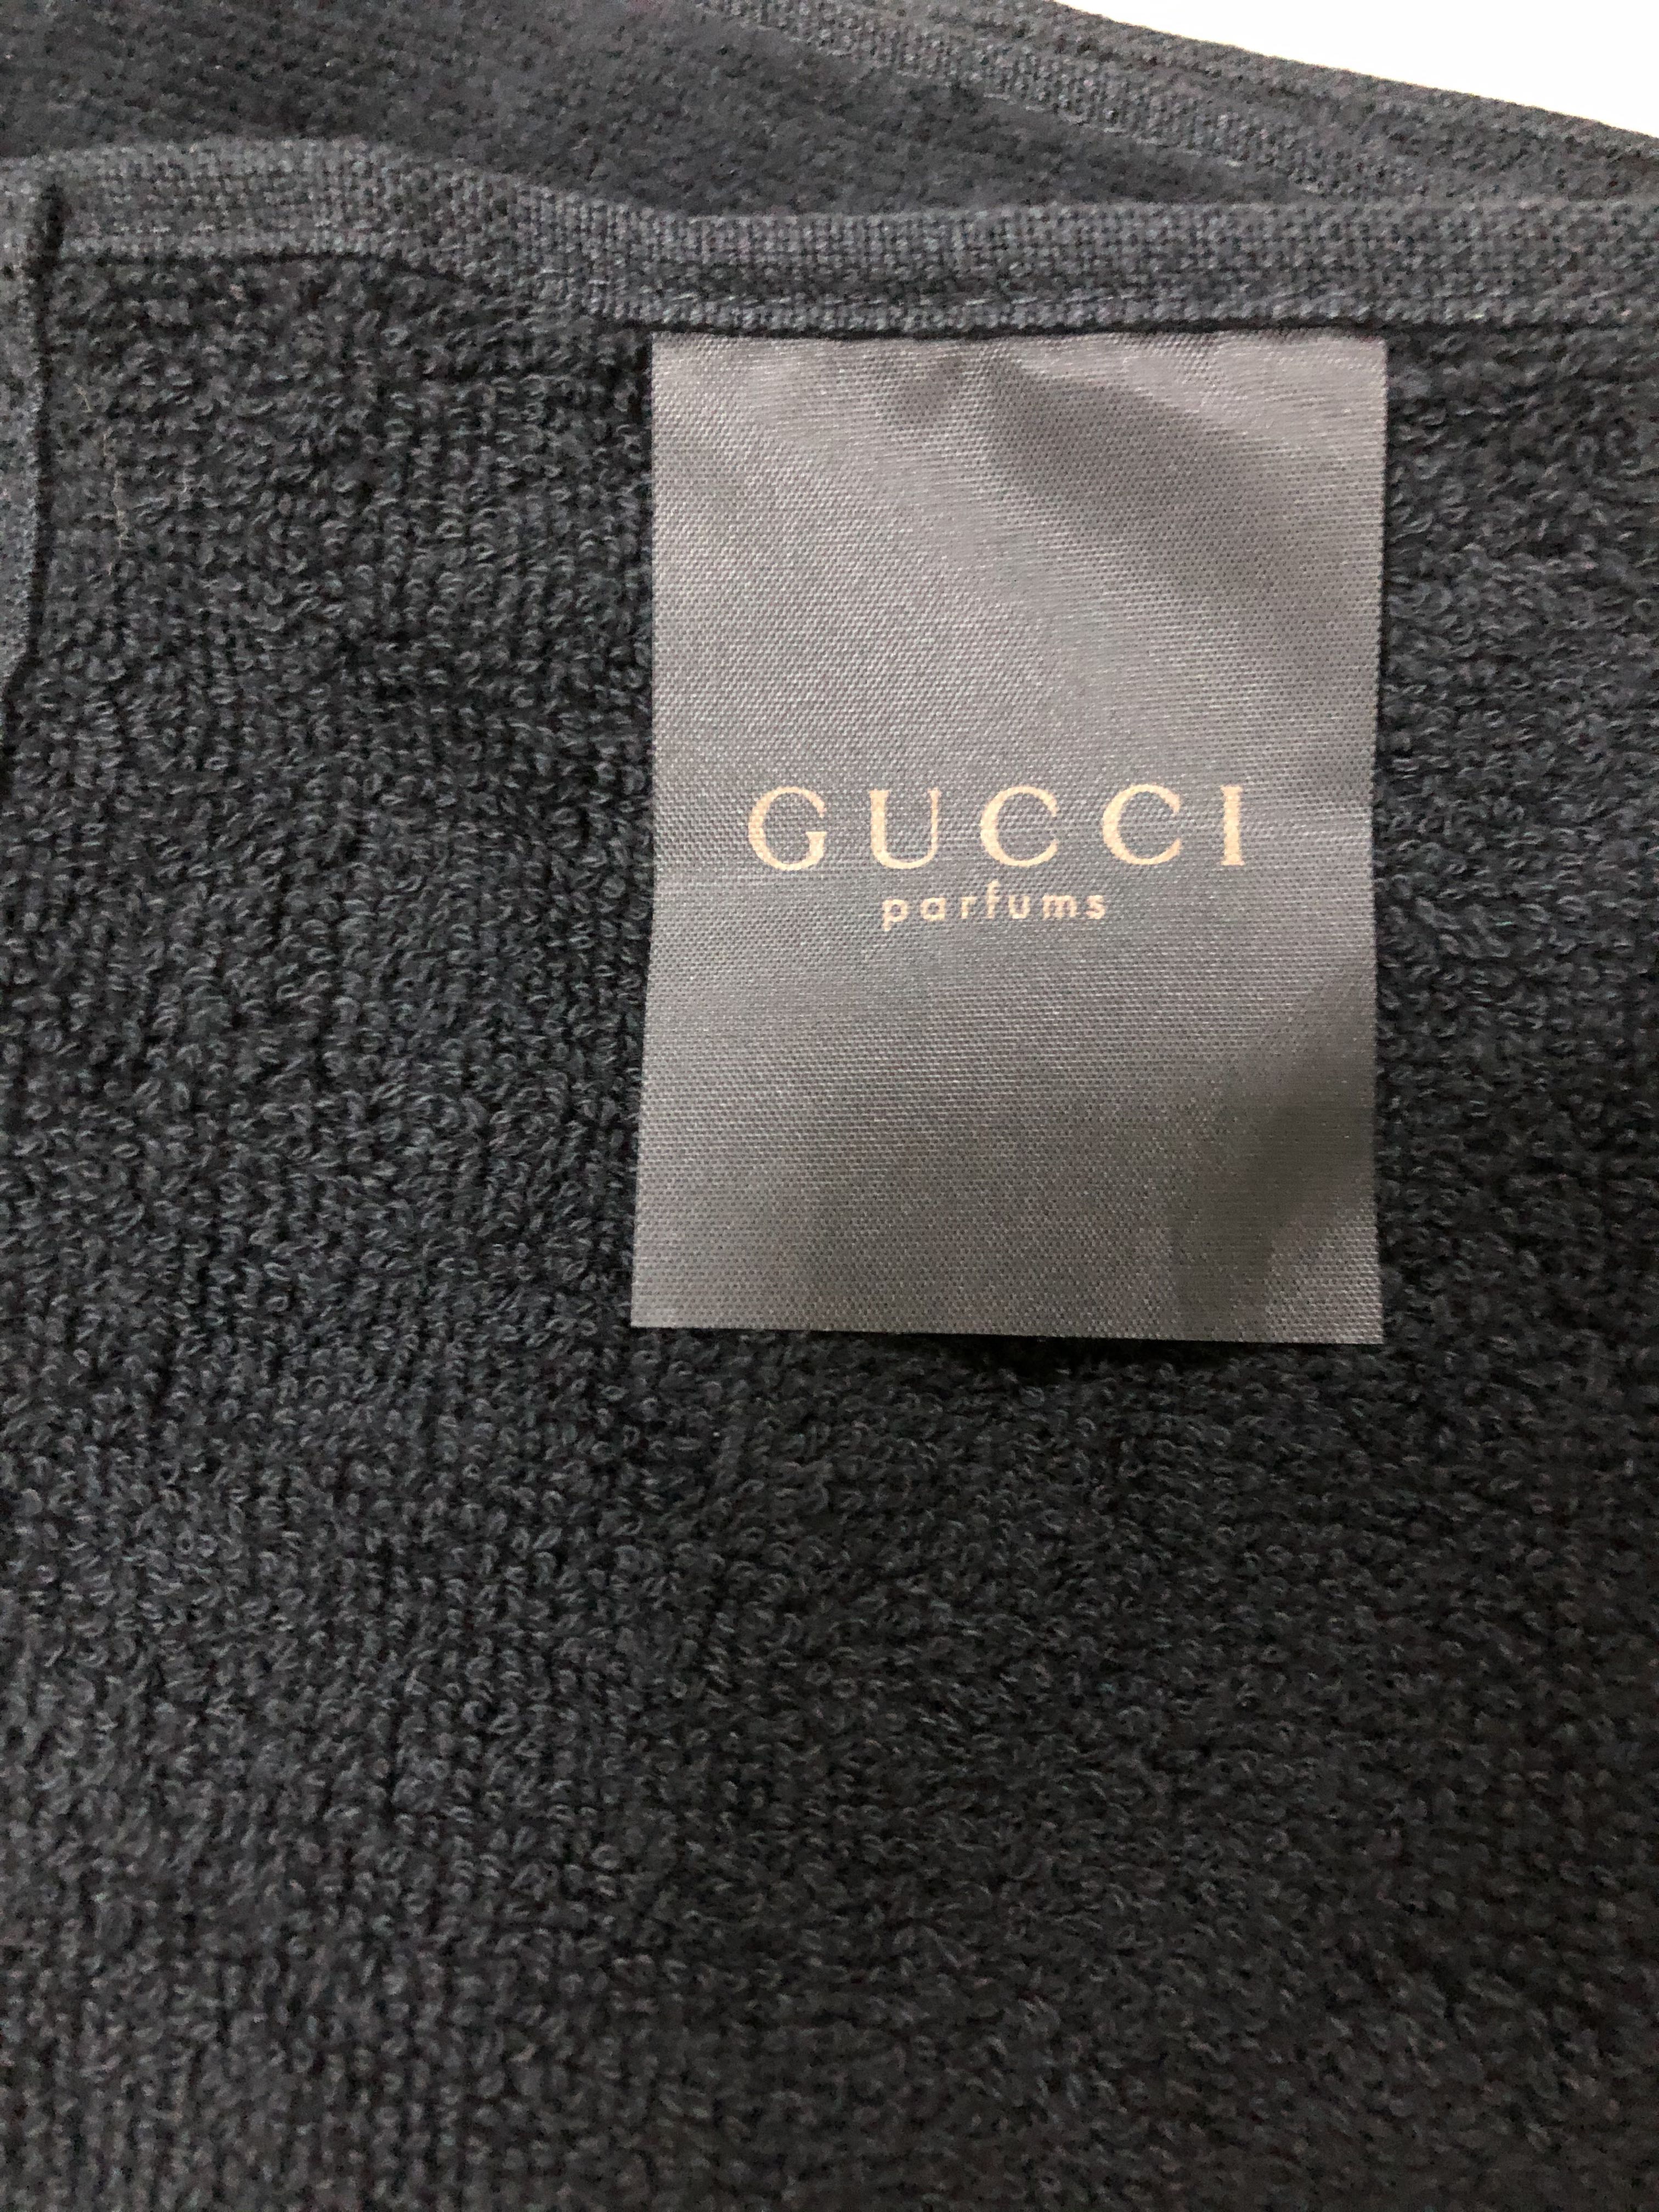 BN Gucci towel, Furniture & Home Living, Bedding & Towels on Carousell